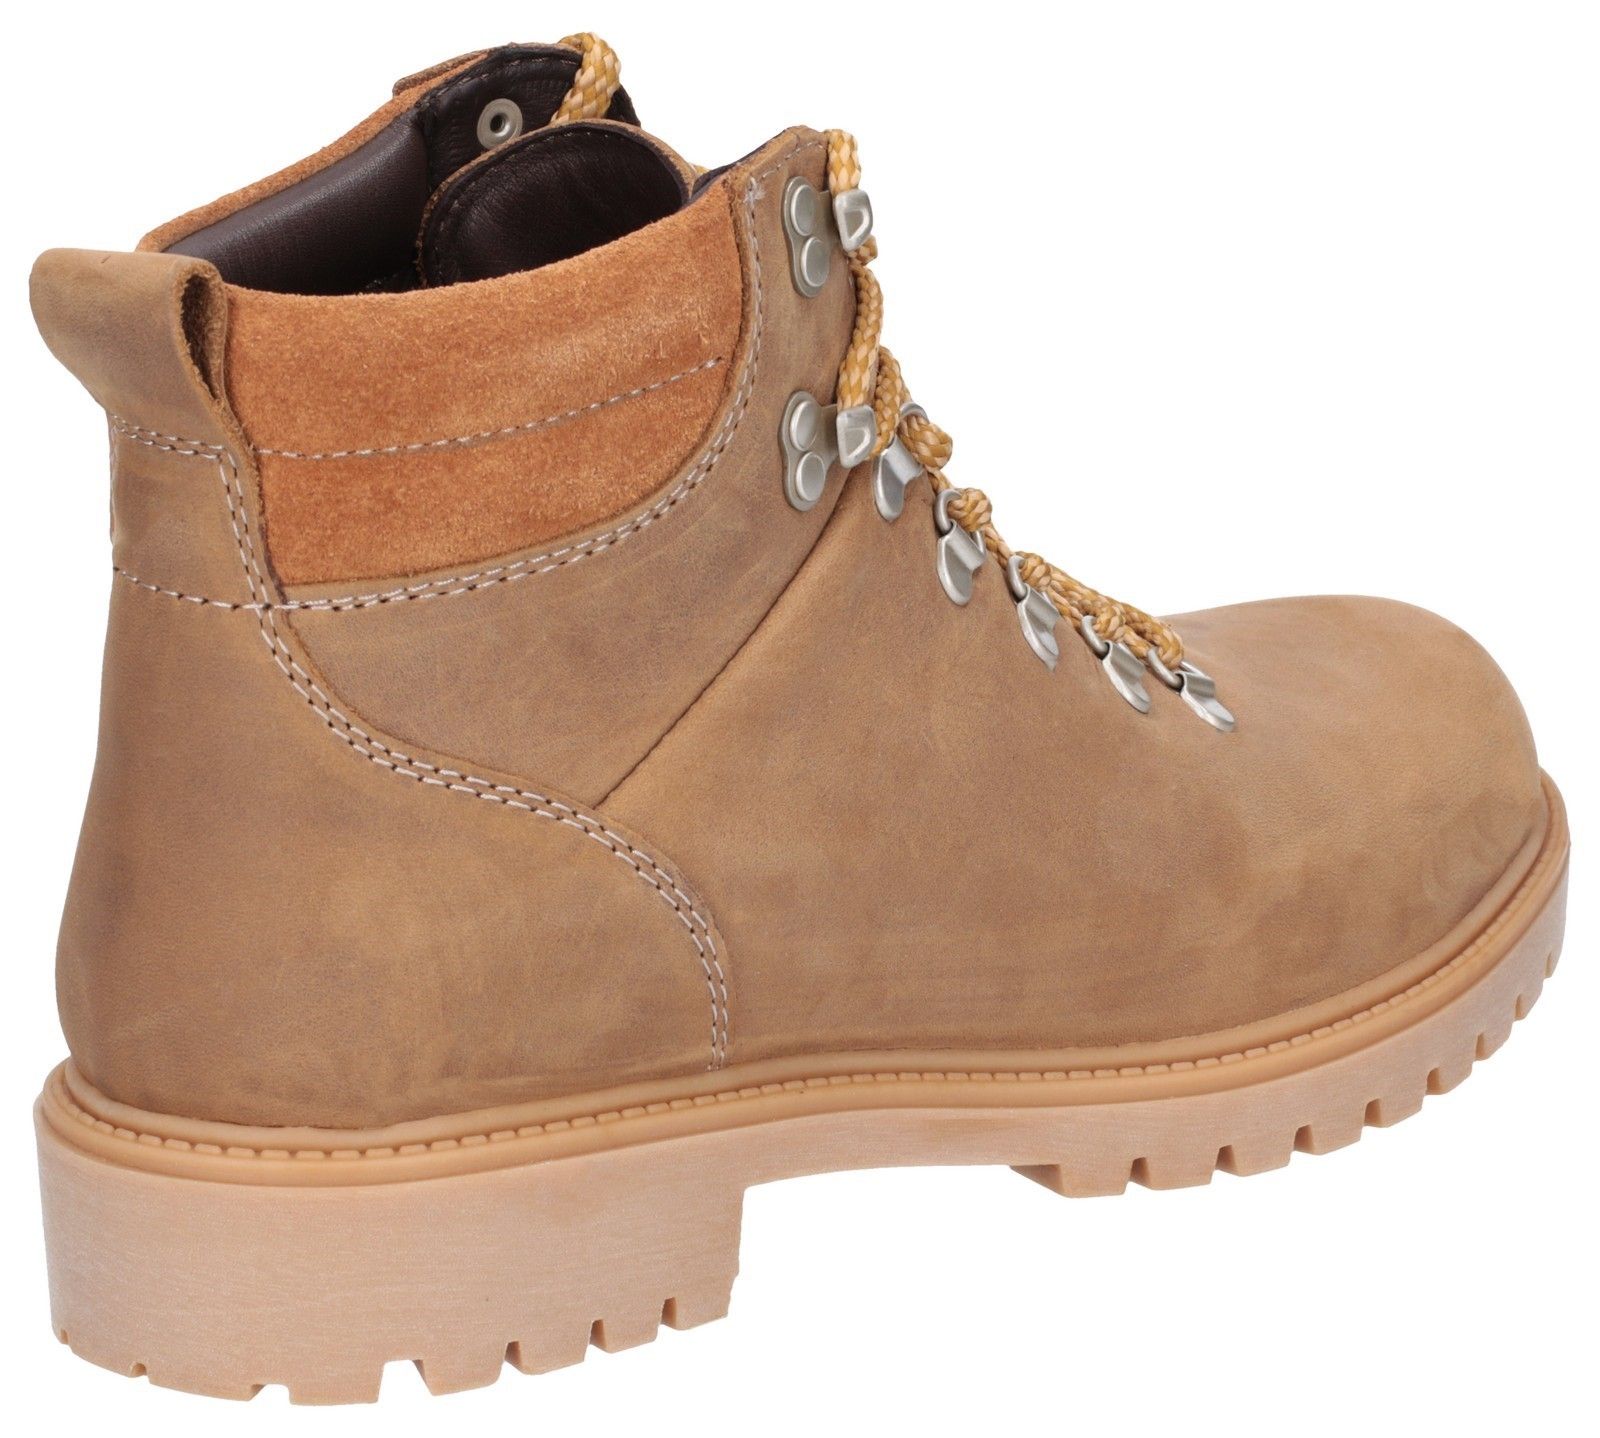 When the casual urban look of hiking boots meet the softness and flexibility, you get the ultimate in footwear. Featuring the memory foam and water-resistant technology our boots are perfect for long walking and travelling. Waterproof Casual Boot. 
Special Gel-Memory Foam footbed. 
Flexible and durable rubber outsole.